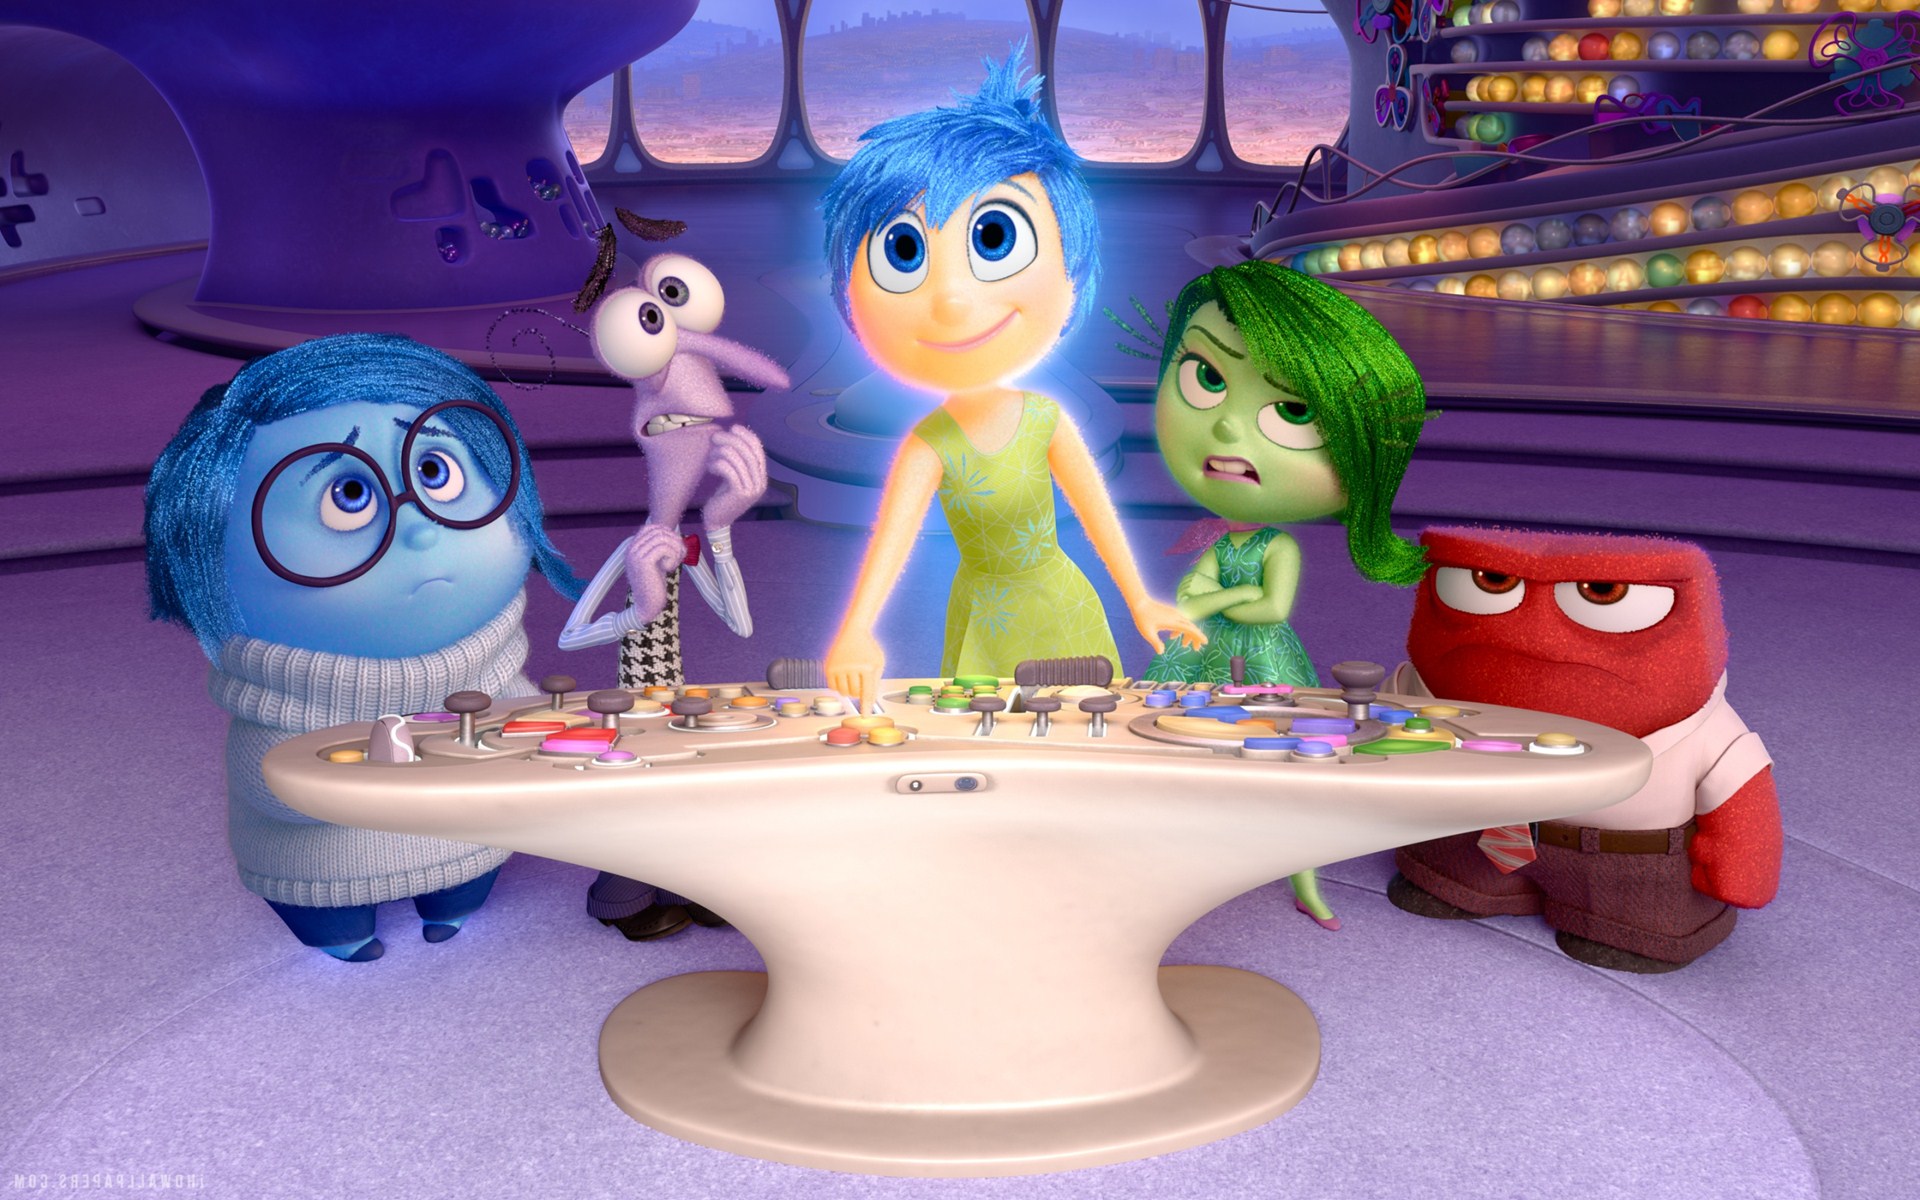 characters from inside out the movie